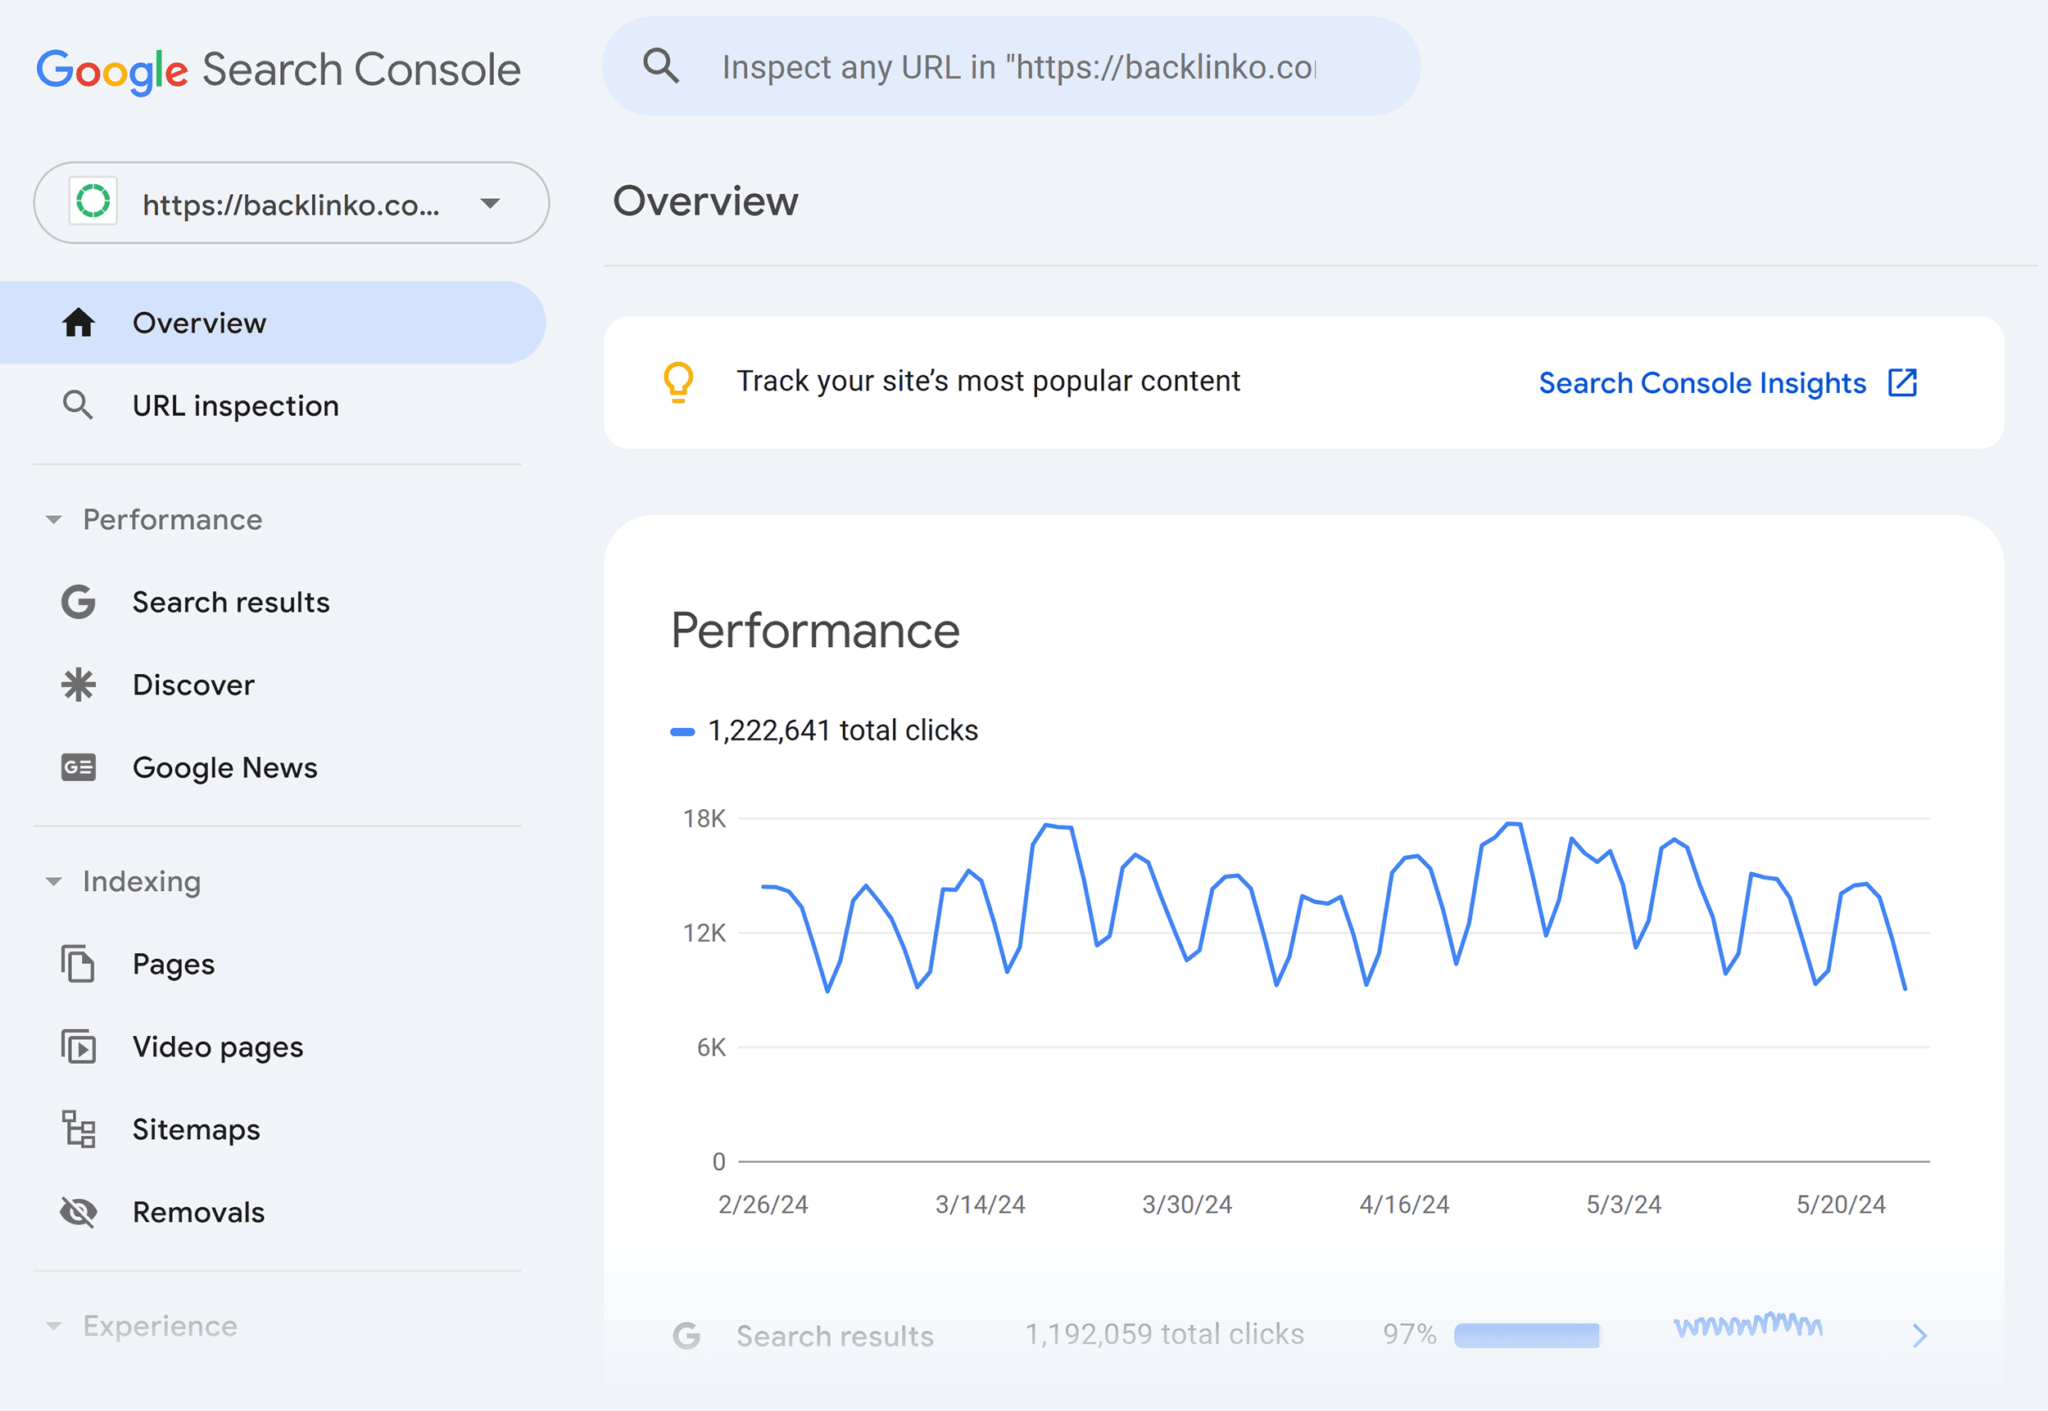 google-search-console 29 Top Digital Marketing Tools for Every Budget